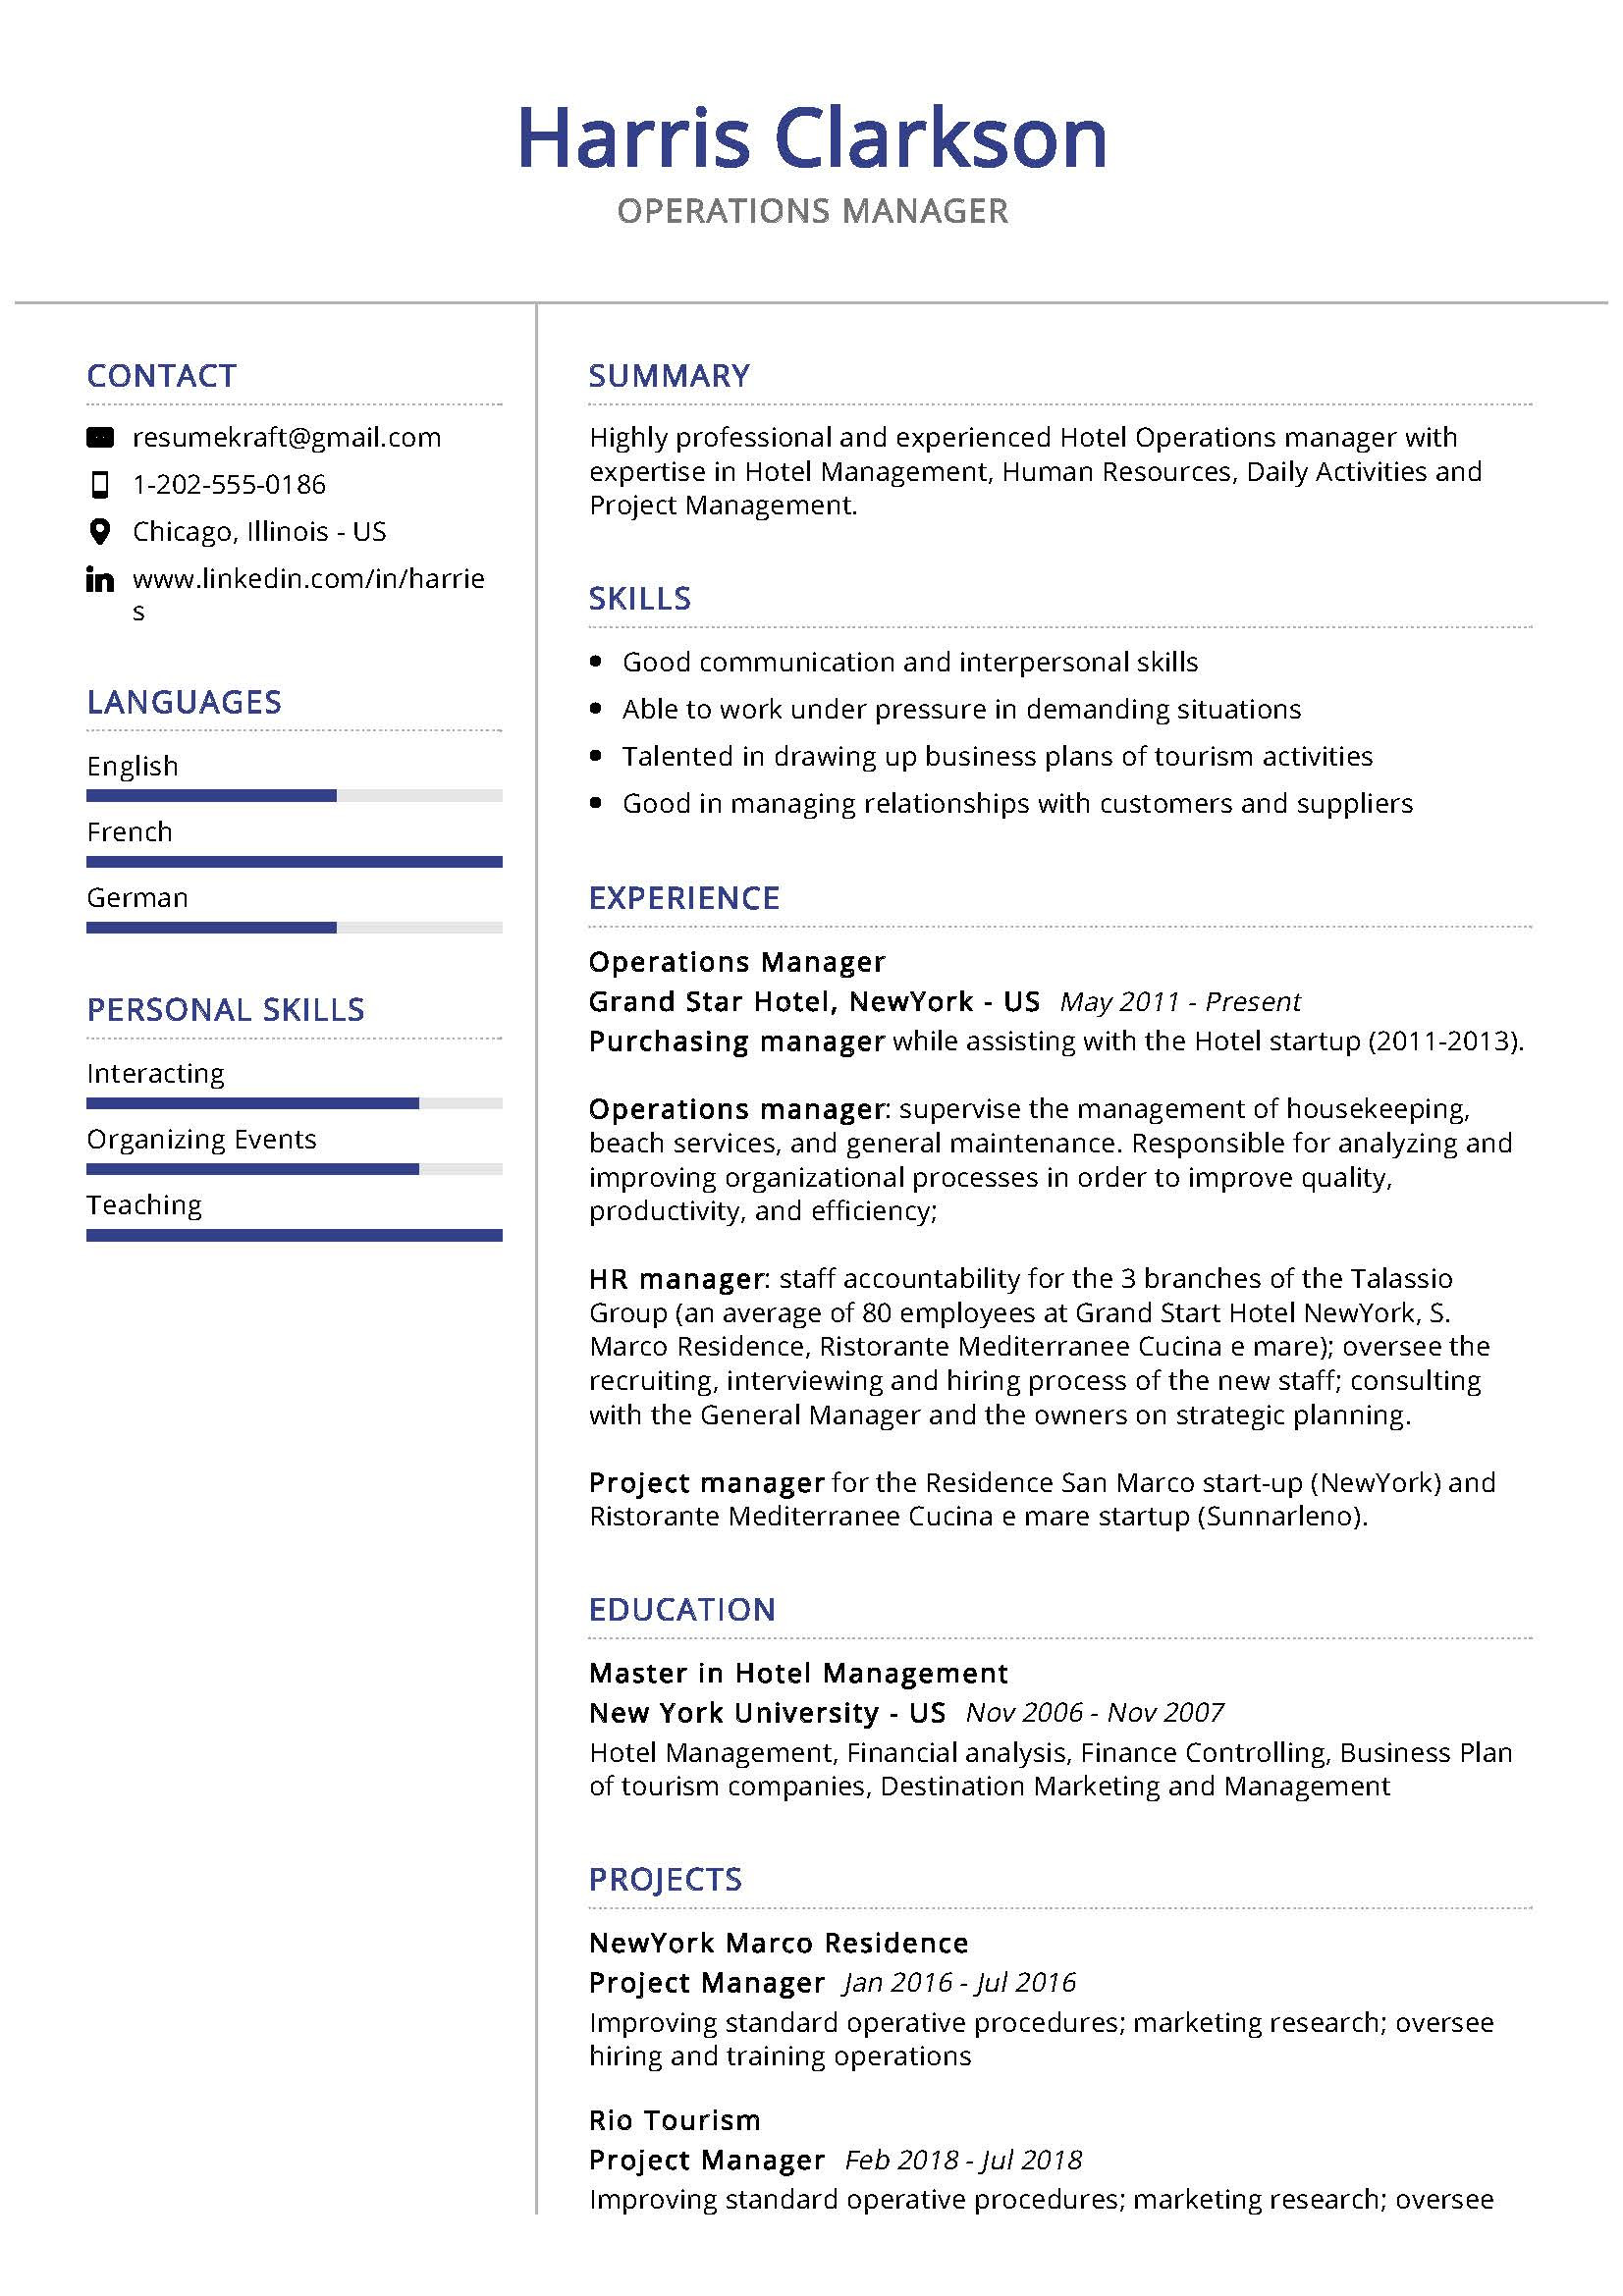 Director Of Business Operations Resume Sample Operations Manager Resume Sample 2022 Writing Tips – Resumekraft